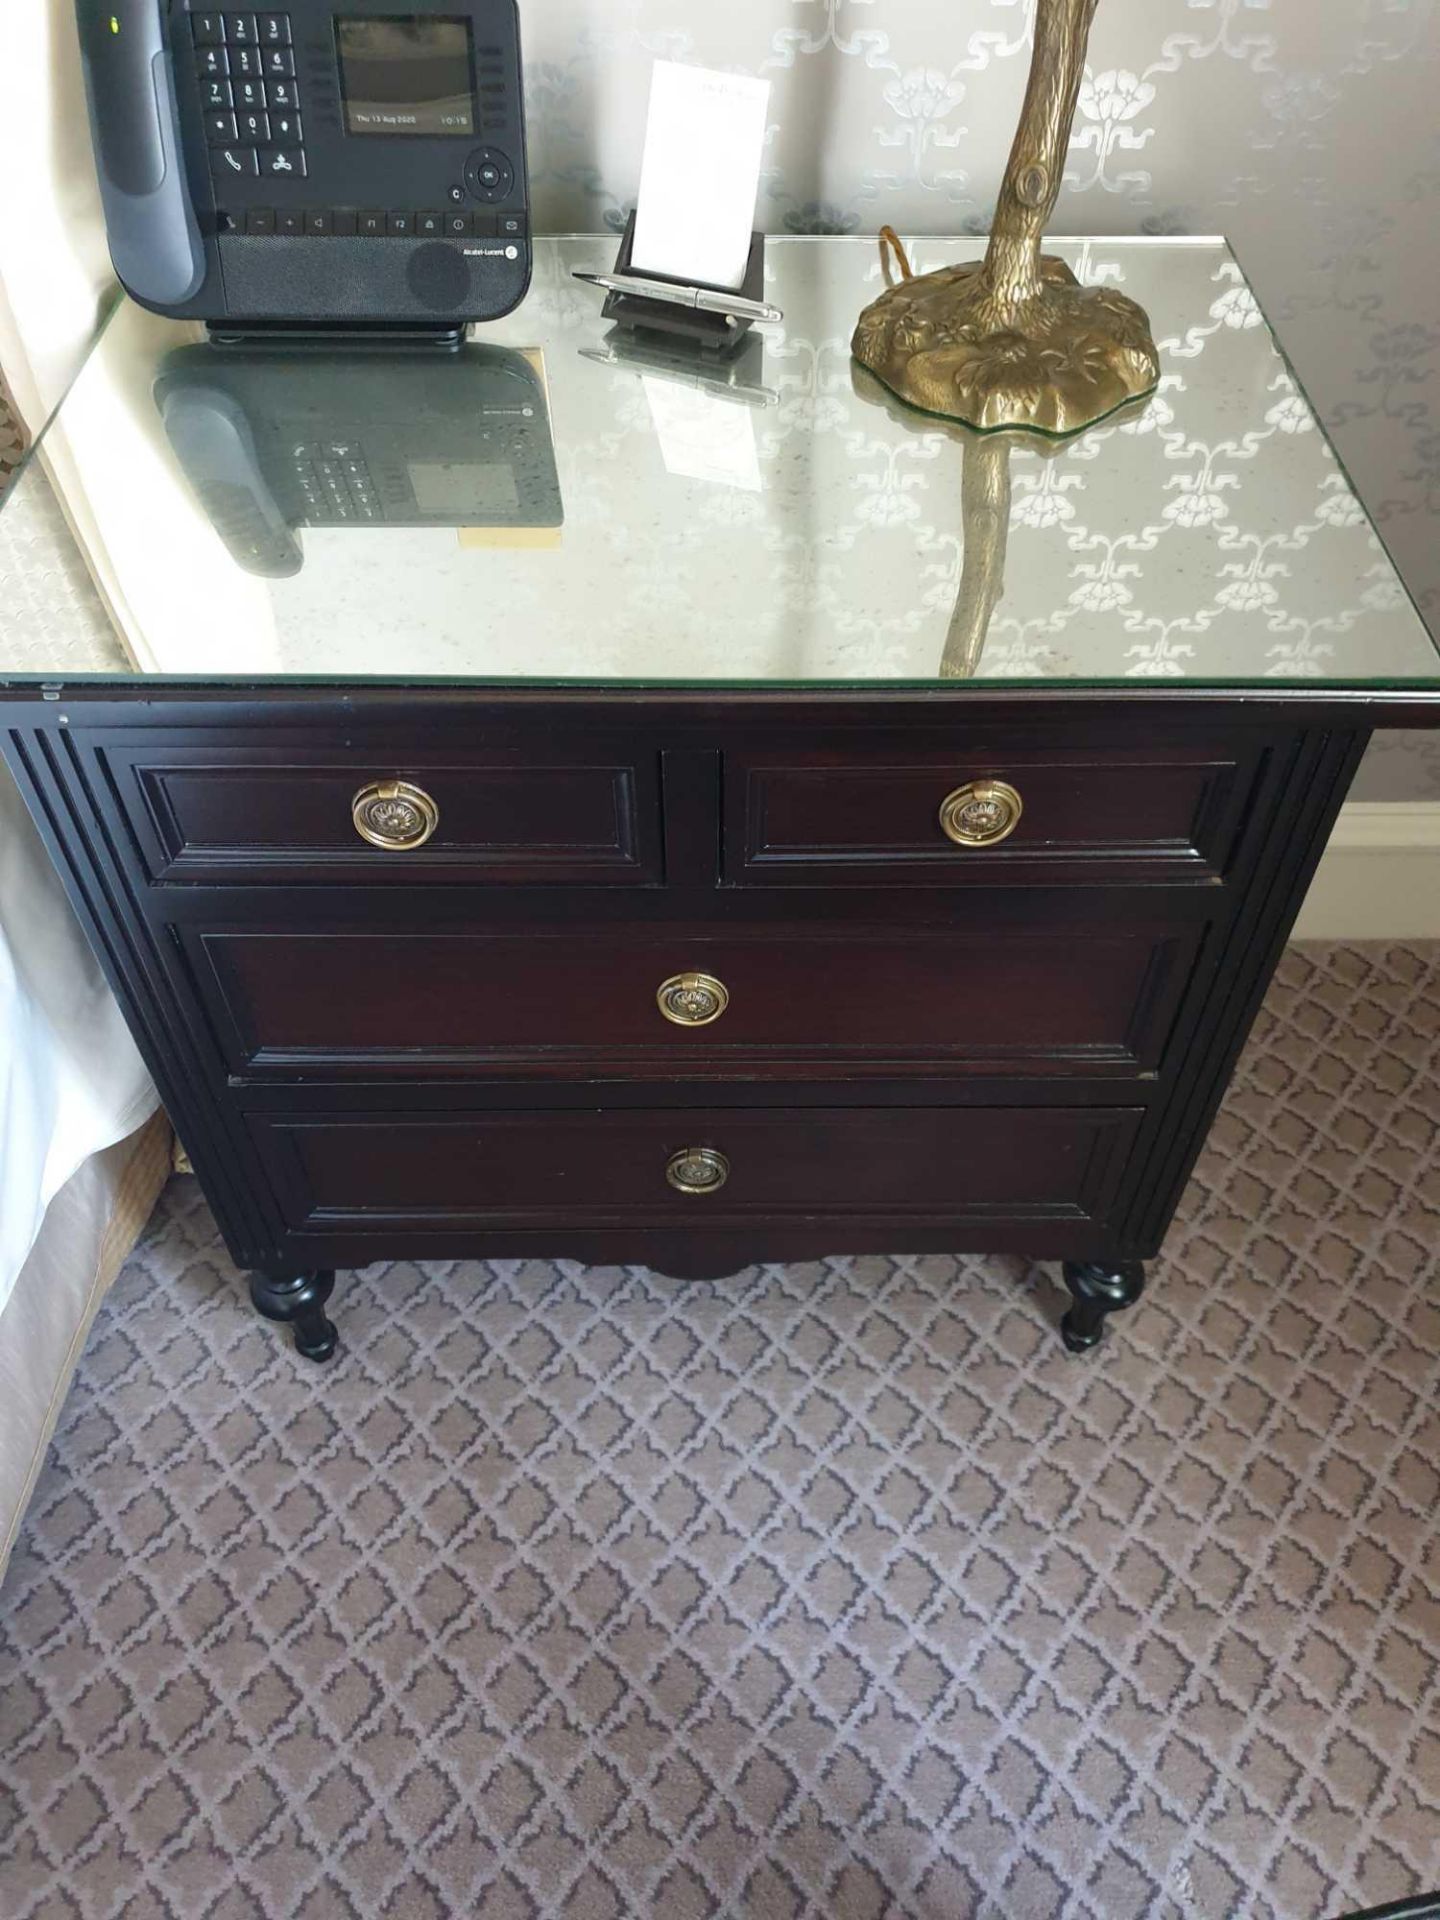 A Pair Four Drawer Mirrored Top Commode Chests Raised By Four Block Feet With A Square Carved - Image 2 of 3